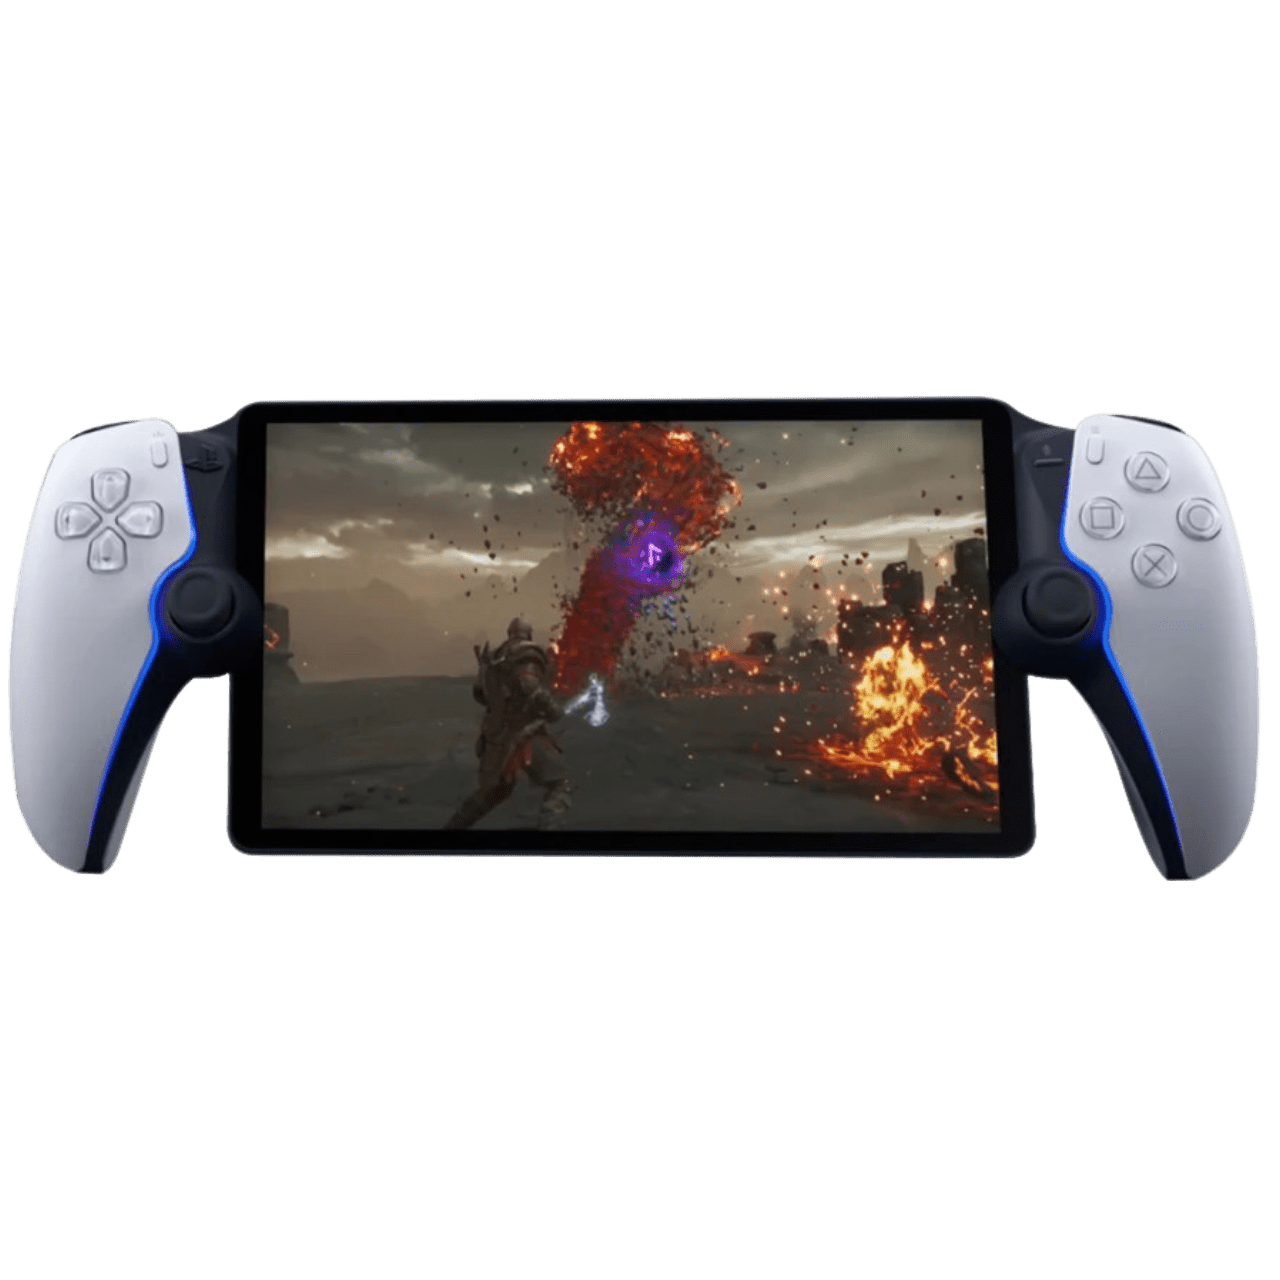 https://images.frandroid.com/wp-content/uploads/2023/06/sony-playstation-project-q-frandroid-2023.png